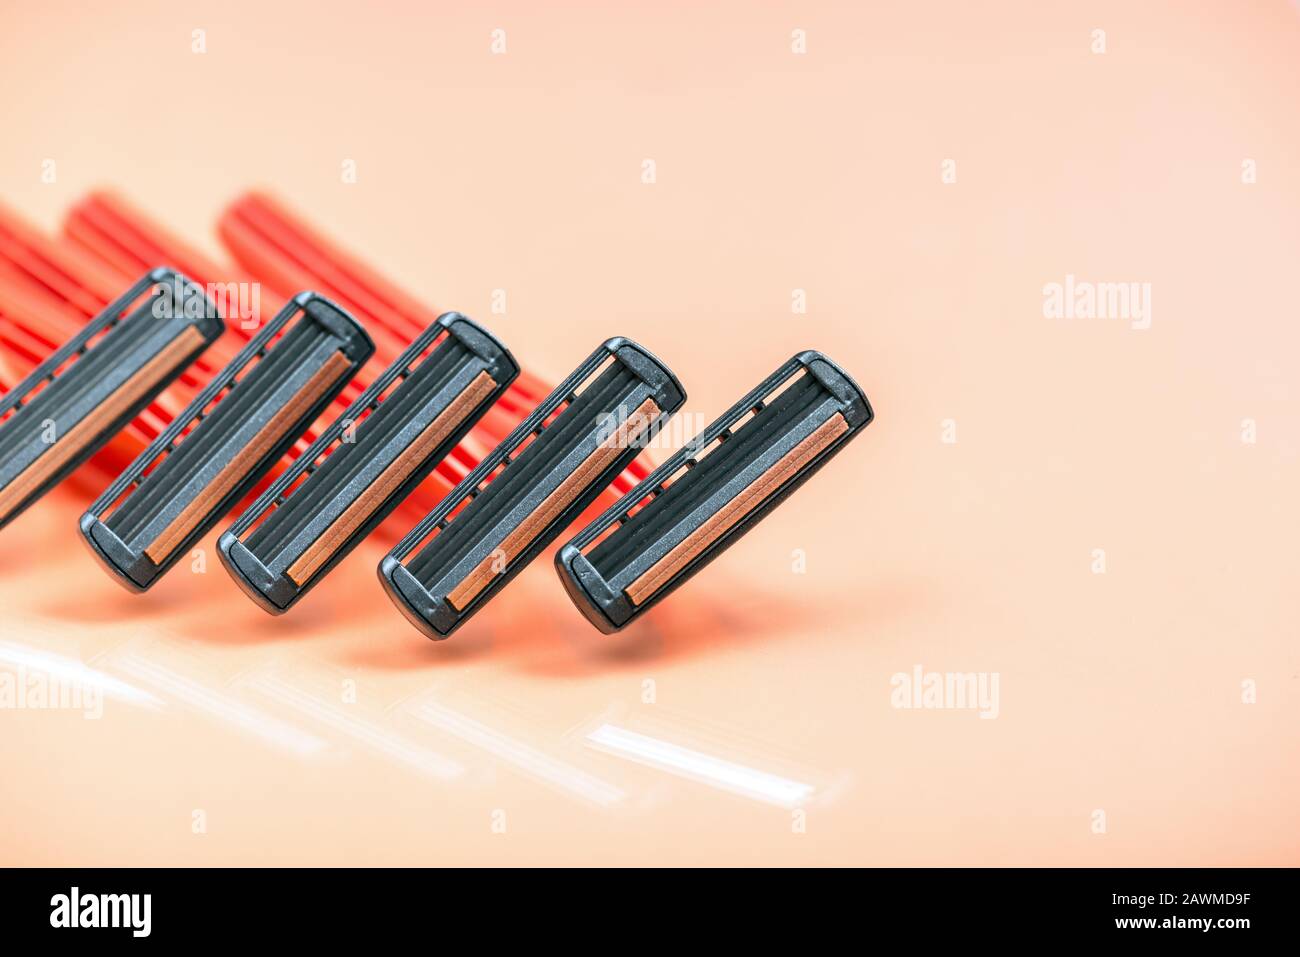 Group of red safety razors on orange color background.  Many Shave blade razors on red surface Stock Photo